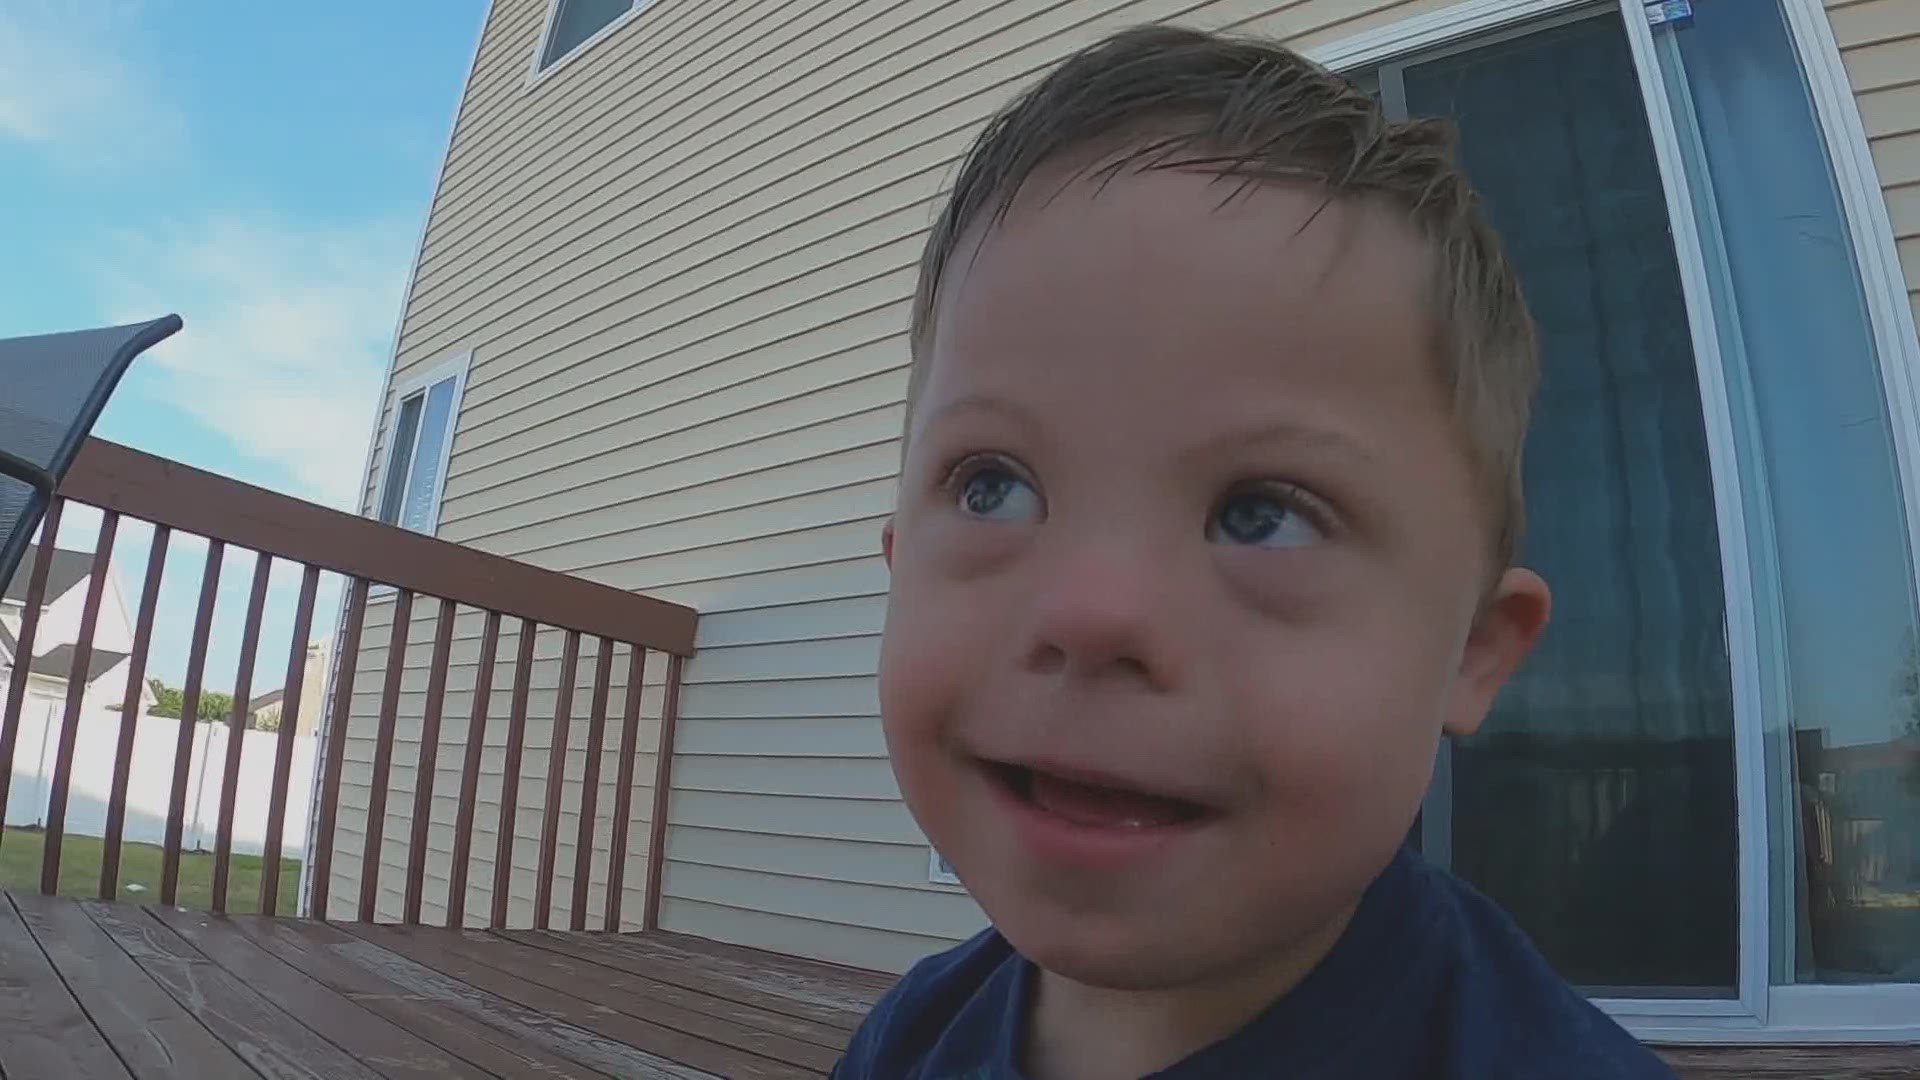 Pierce is 3-and-a-half years old. His parents are still trying to figure out how to best educate their young boy, who has Down syndrome.